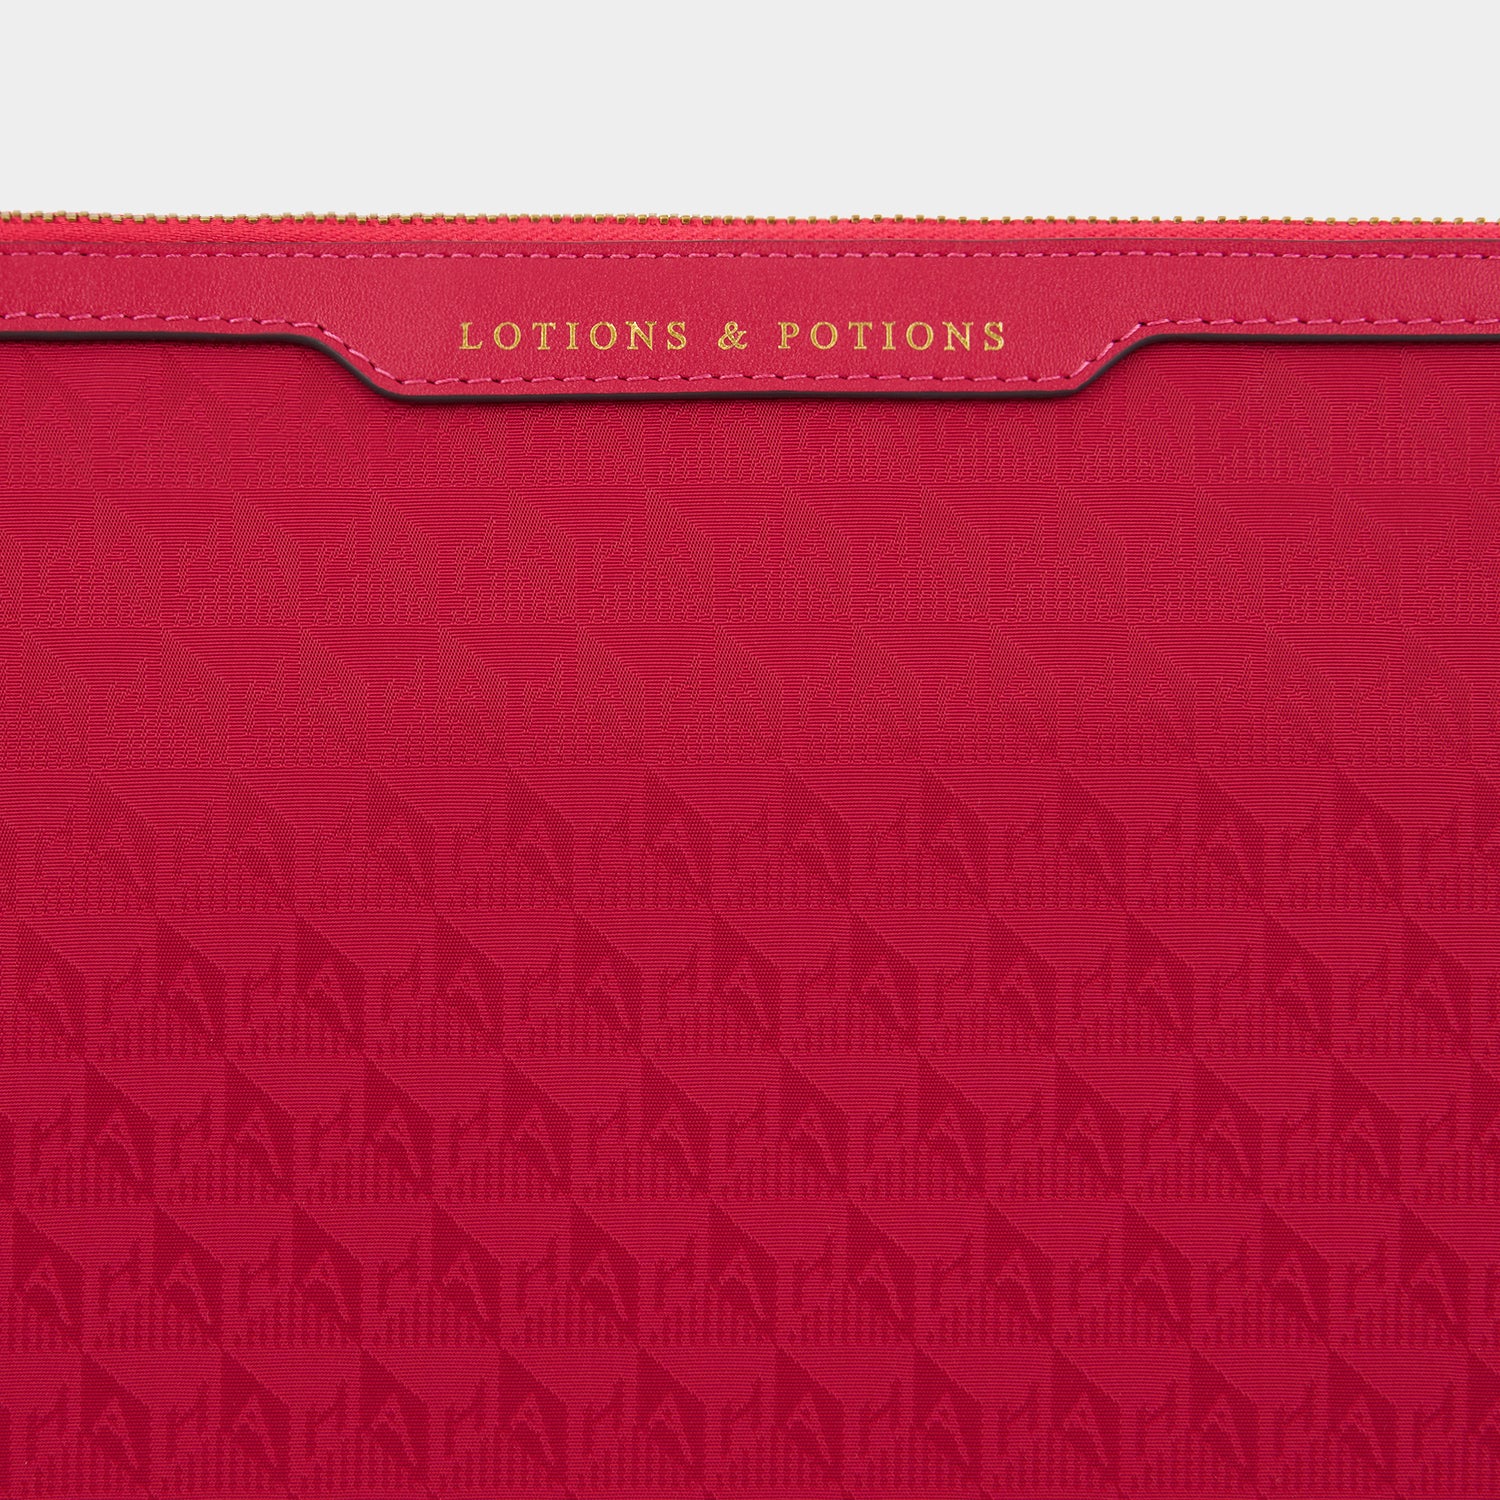 Logo Lotions and Potions Pouch -

                  
                    Jacquard Nylon Potions in Magenta -
                  

                  Anya Hindmarch UK
